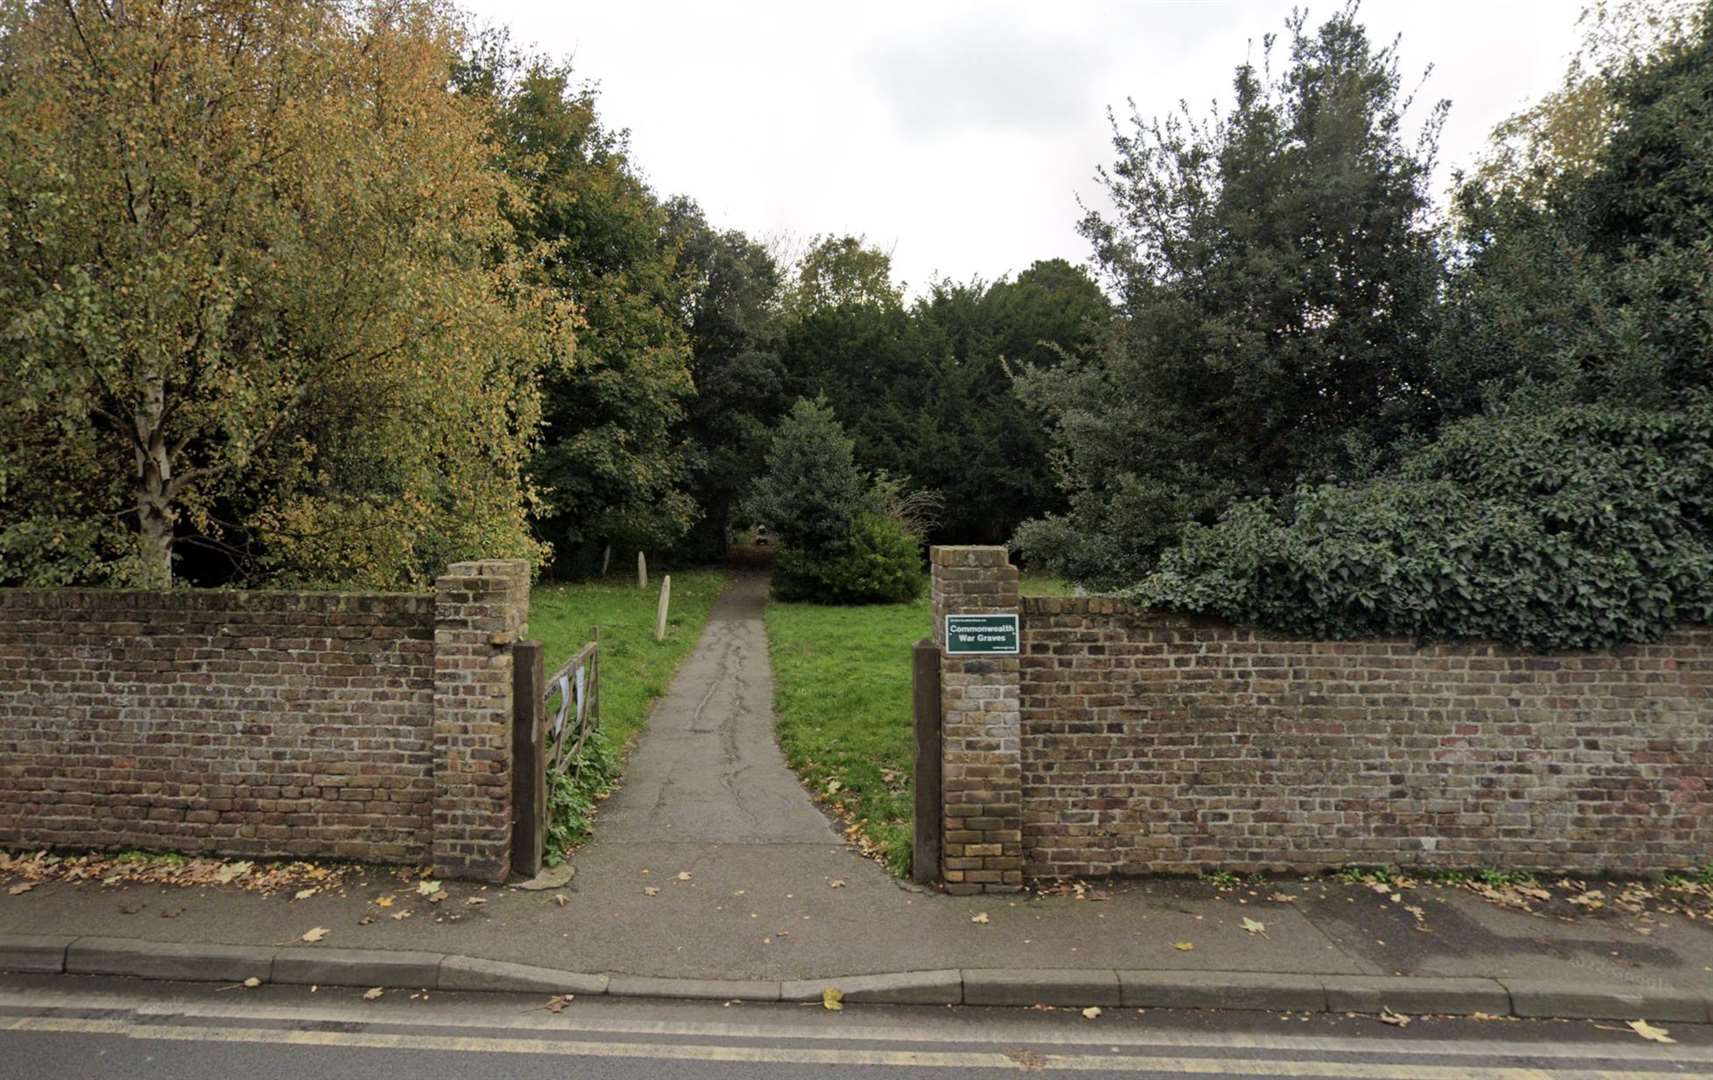 The man was attacked as he entered St Laurence Graveyard in Ramsgate